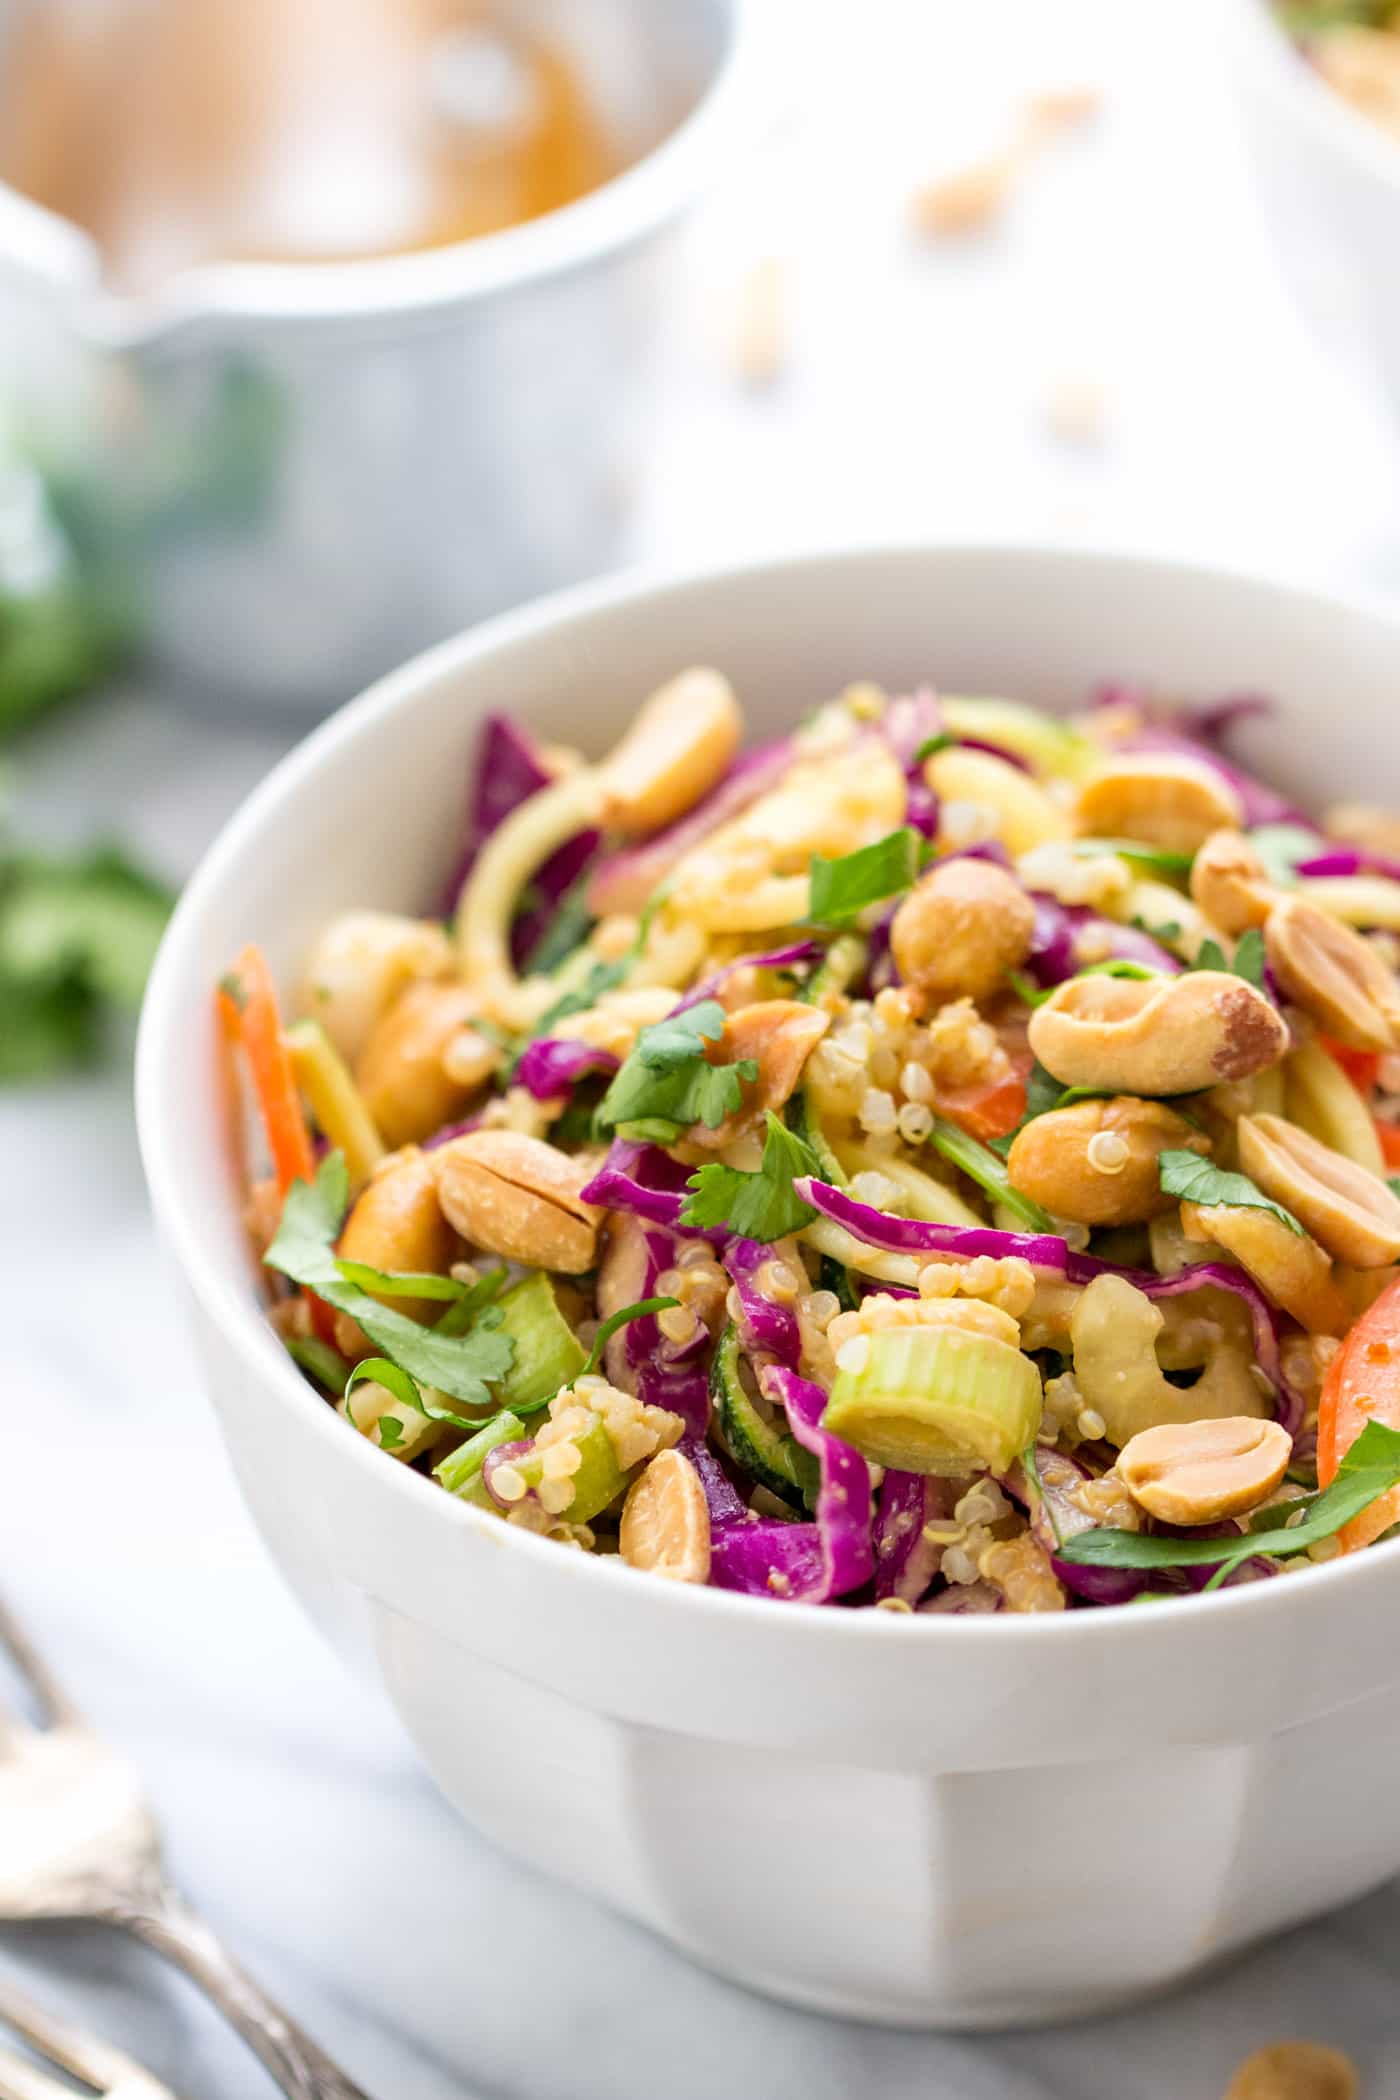 PAD THAI ZUCCHINI NOODLE SALAD with a creamy peanut butter sauce and quinoa for extra protein [vegan]